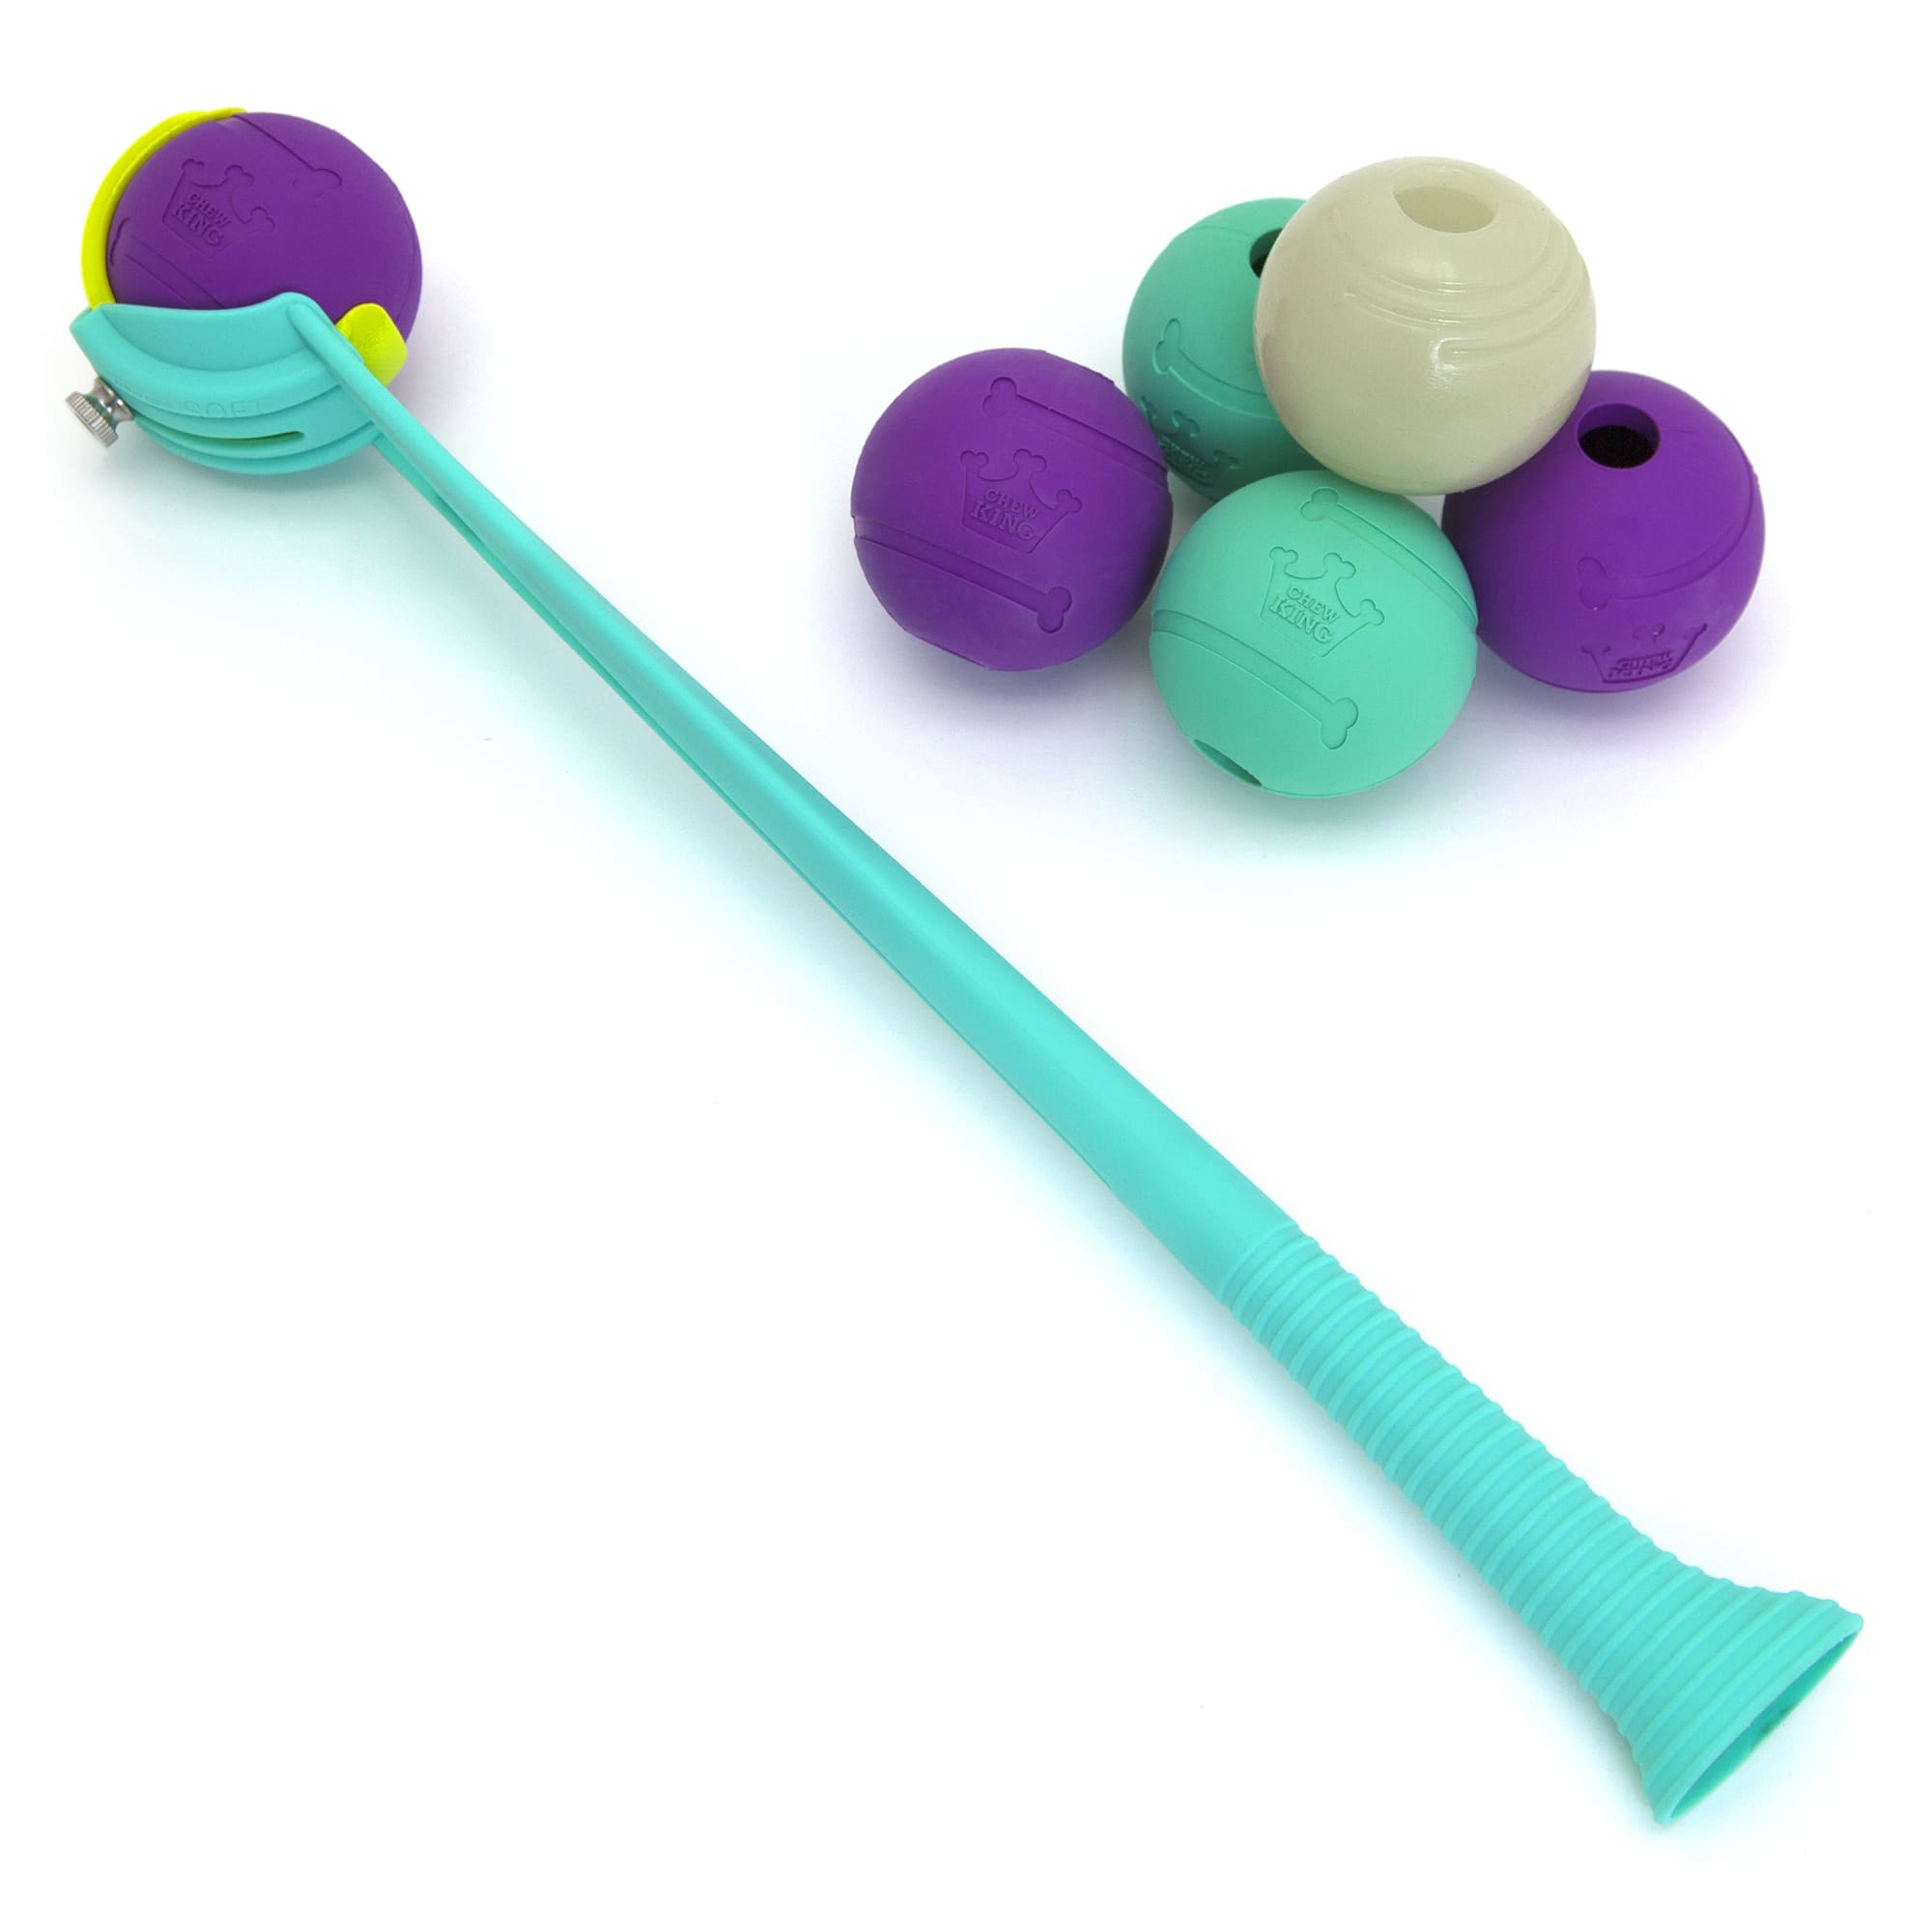 ball launcher toy